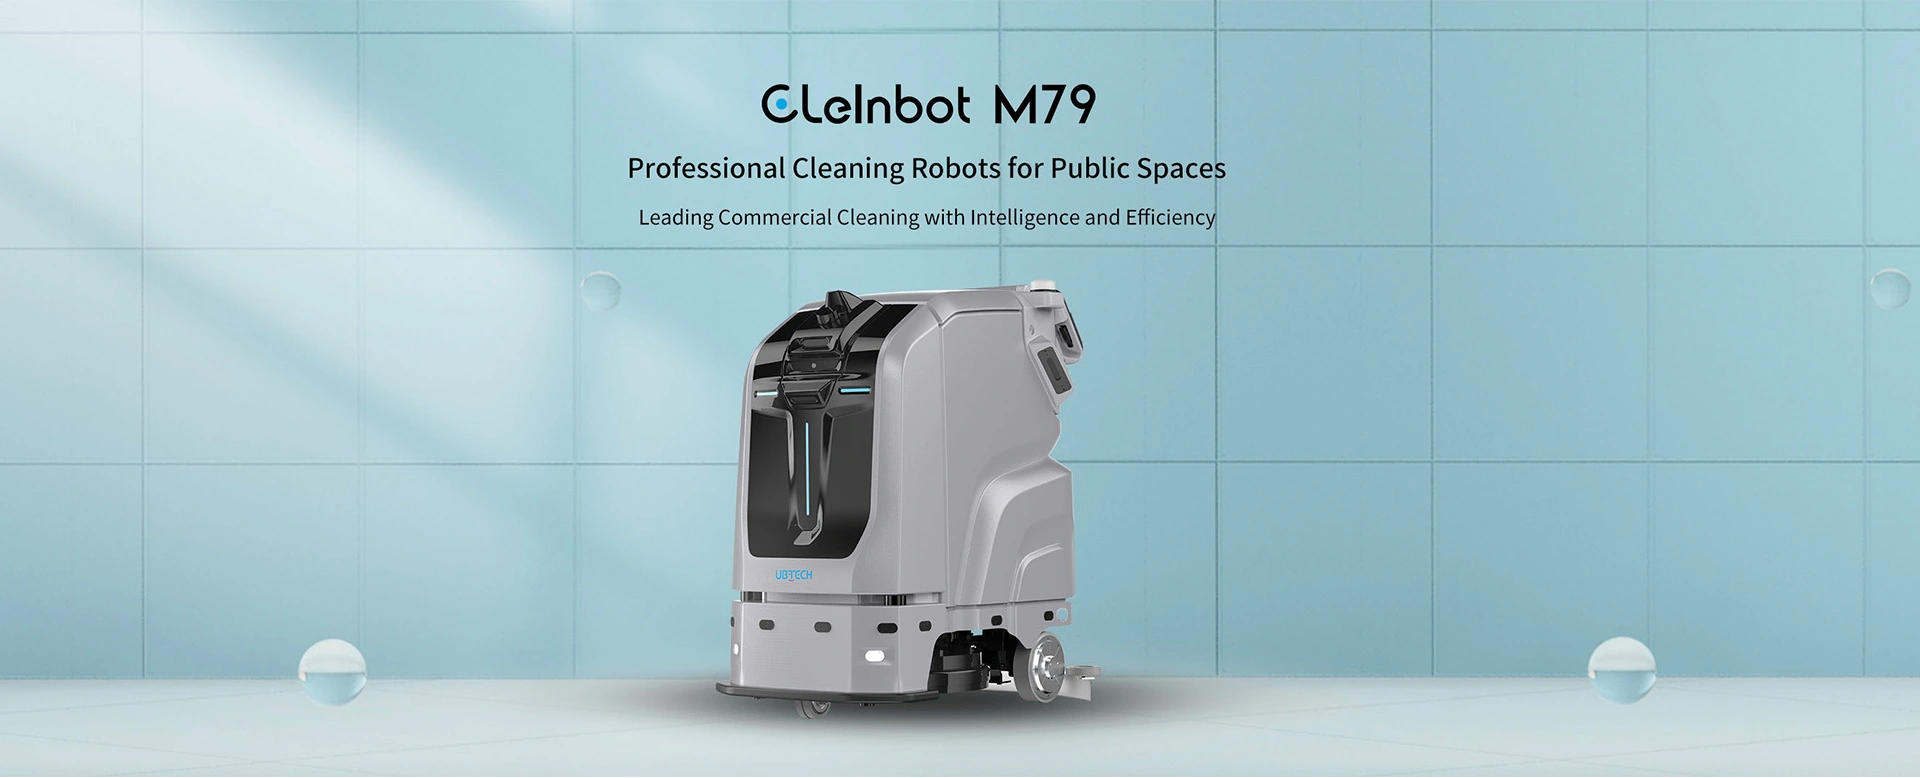 Ubtech CLEINBOT M79 Professional Cleaning Robots for Public Space